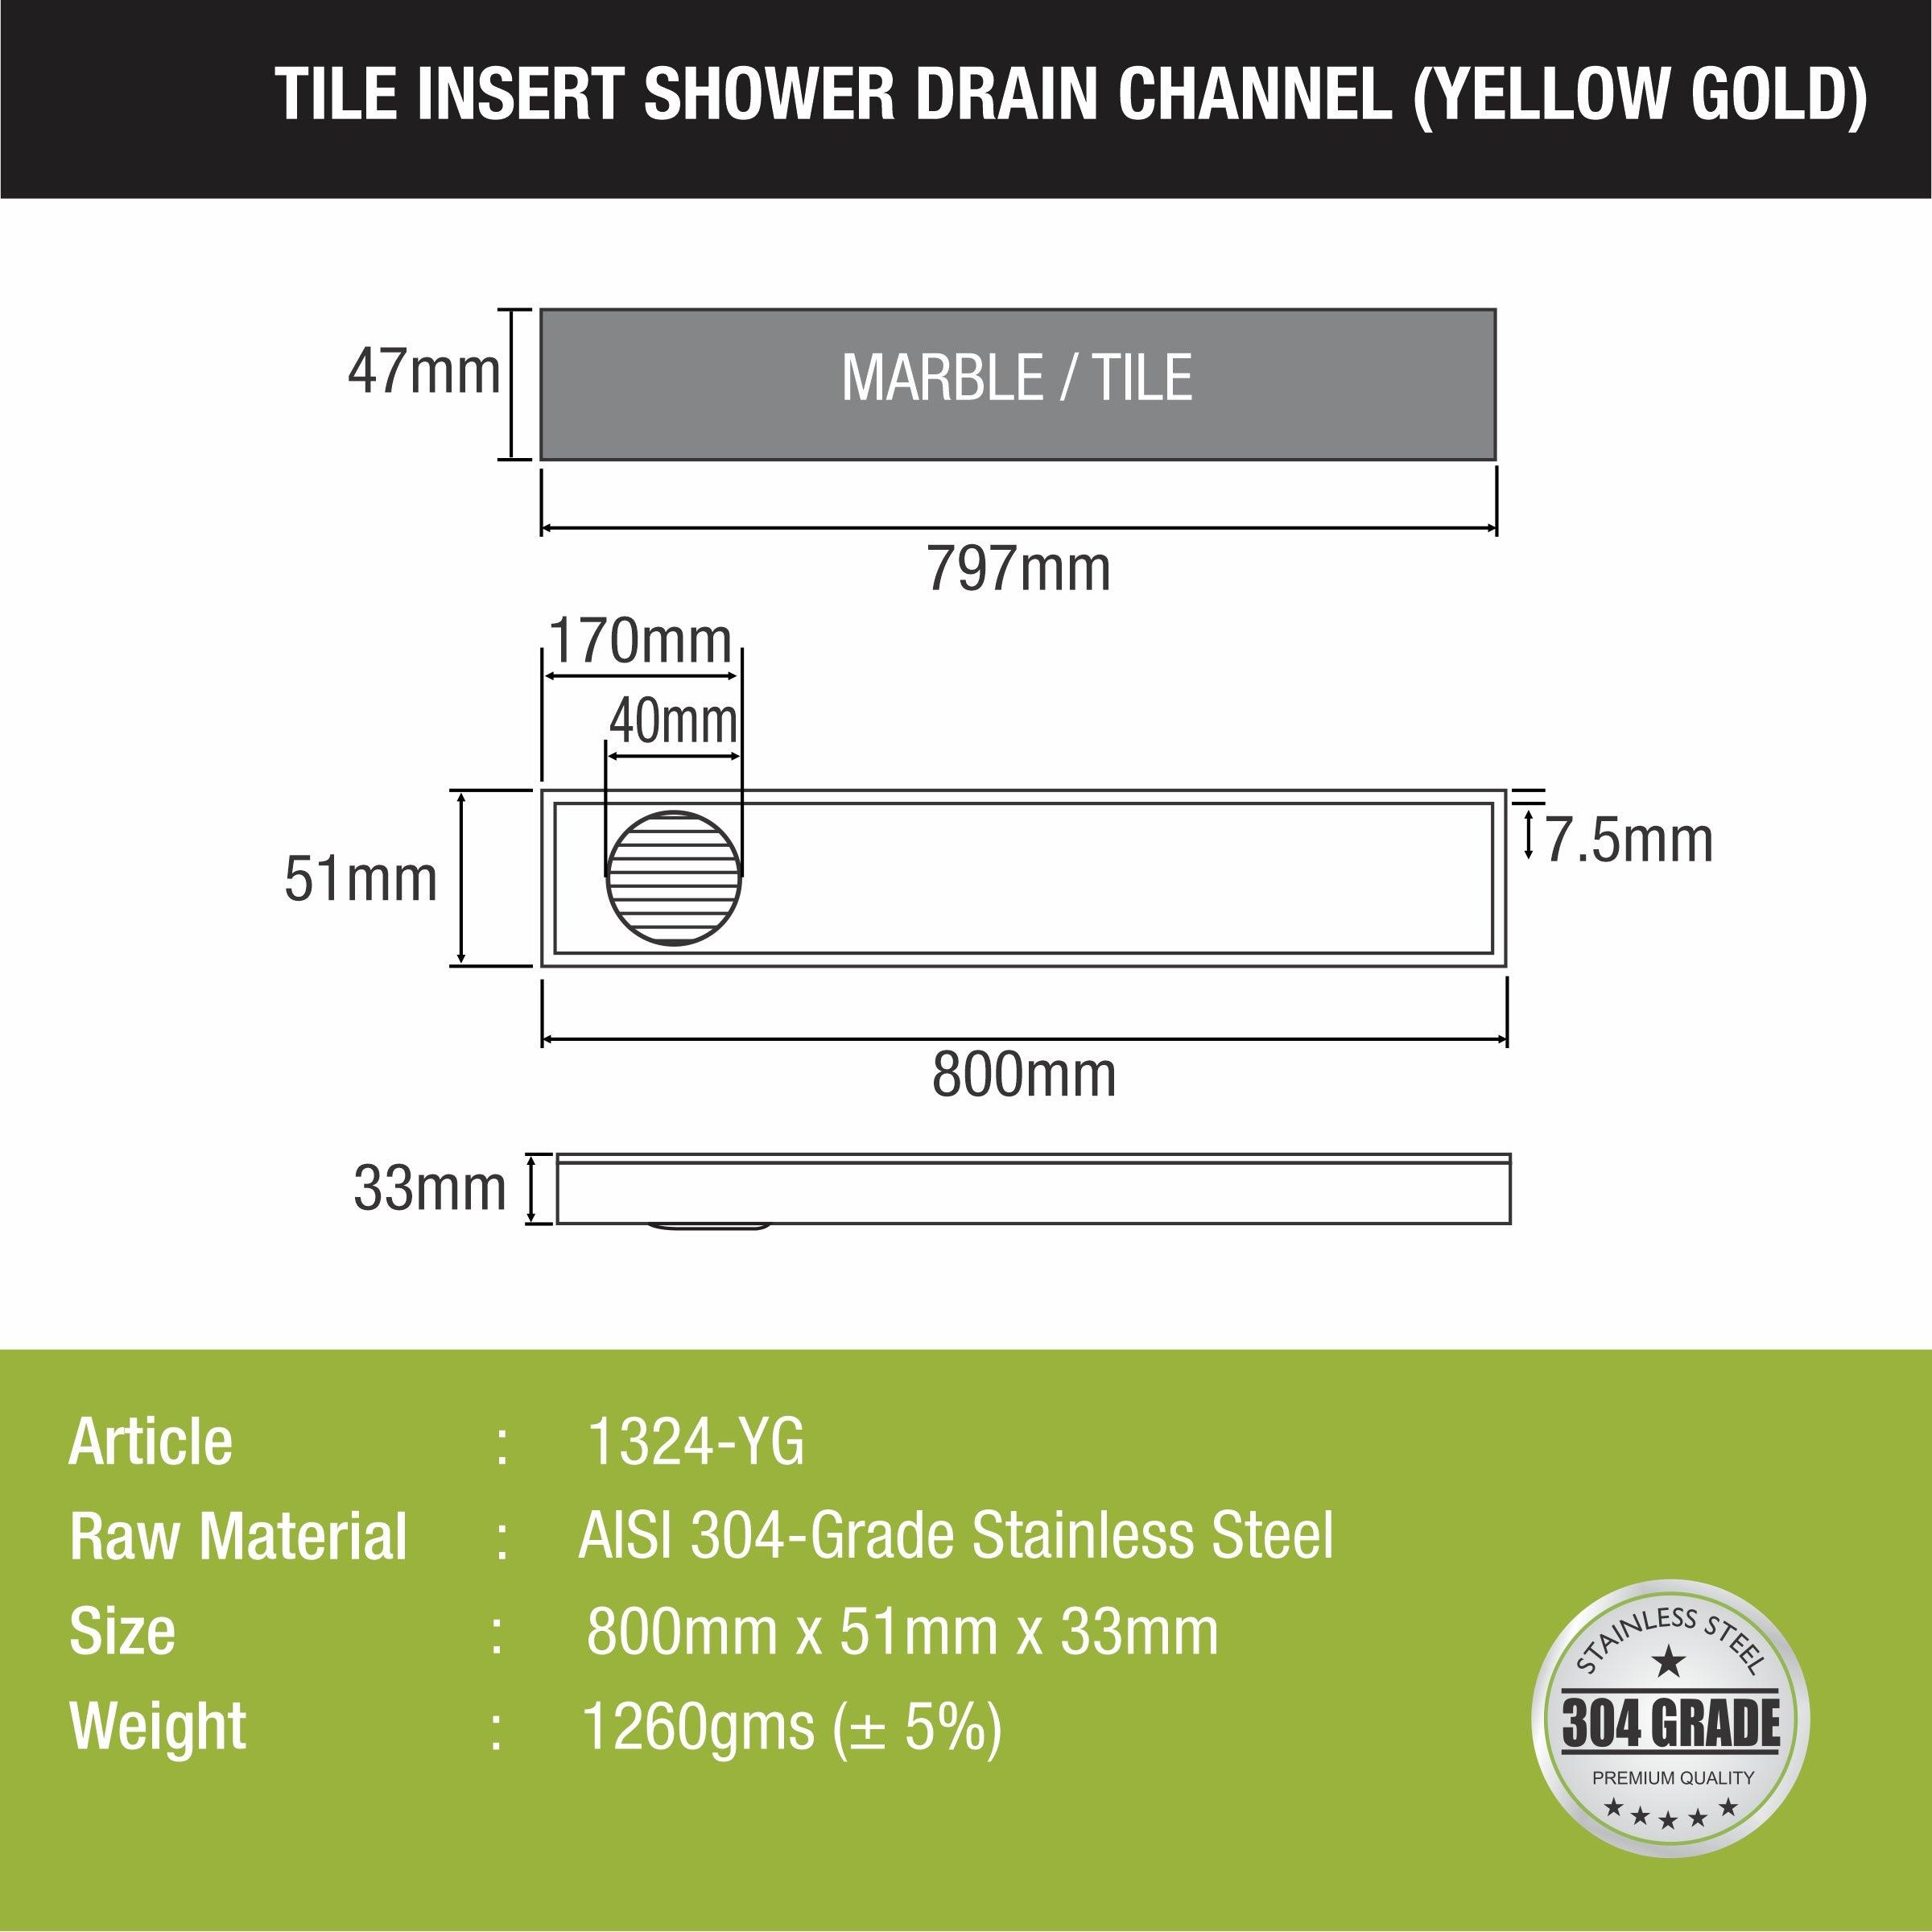 Tile Insert Shower Drain Channel - Yellow Gold (32 x 2 Inches) sizes and dimensions